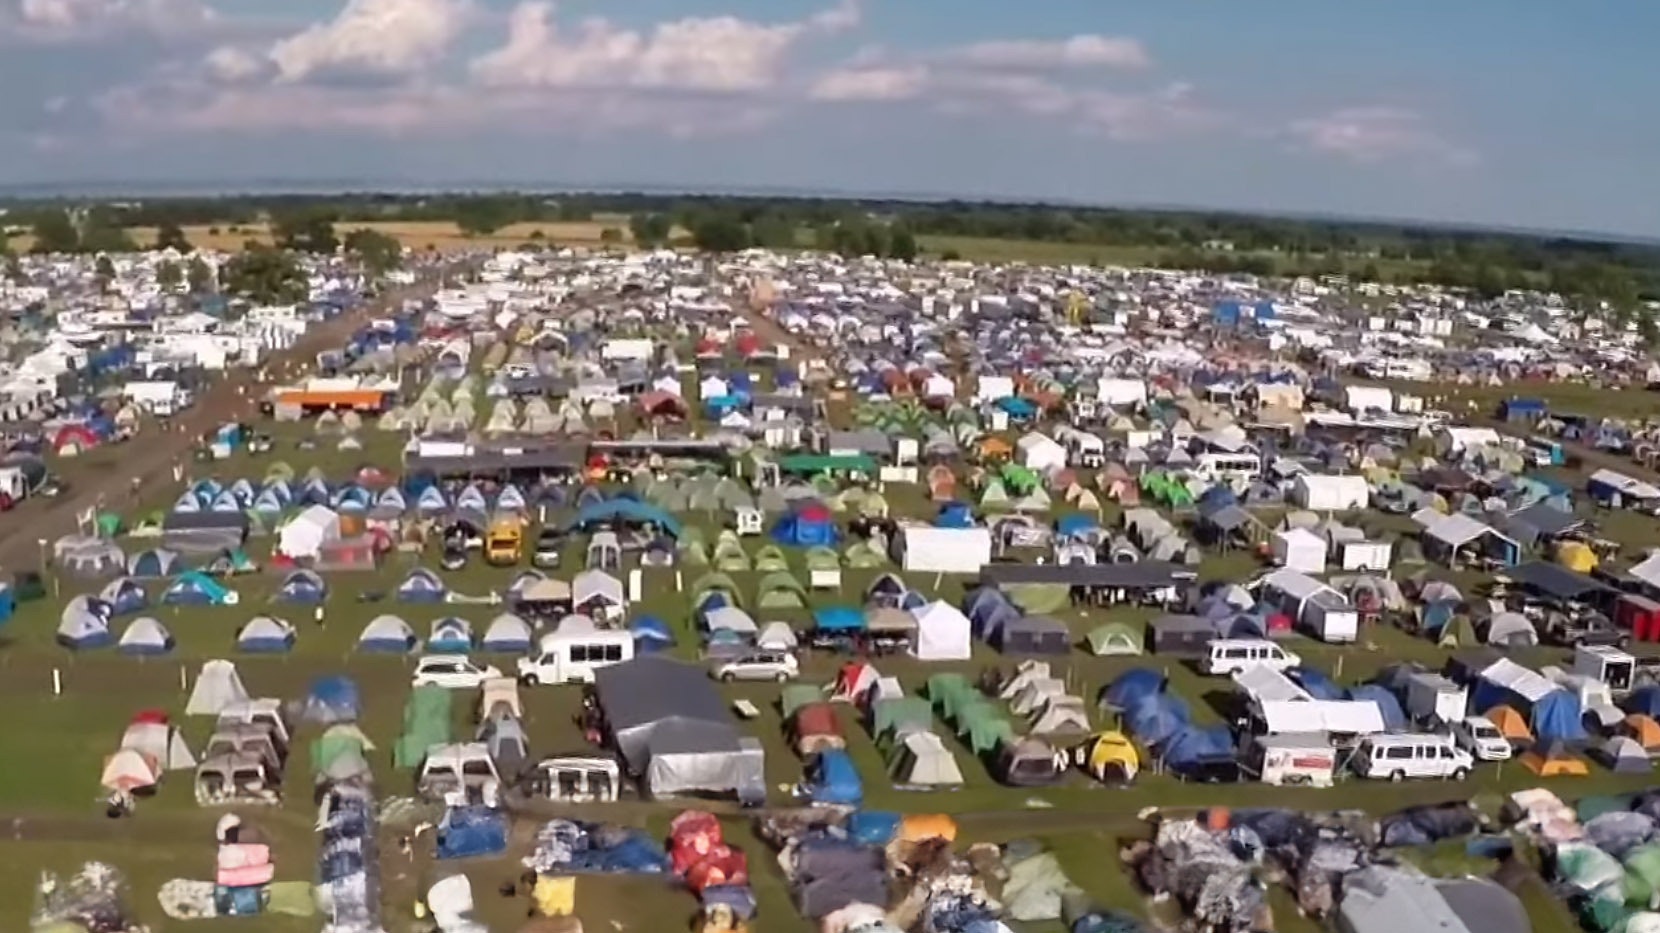 Held every five years, the International Pathfinders Camporee event draws tens of thousands of people. The last event in Oshkosh, Wisconsin, had 55,000 attendees.